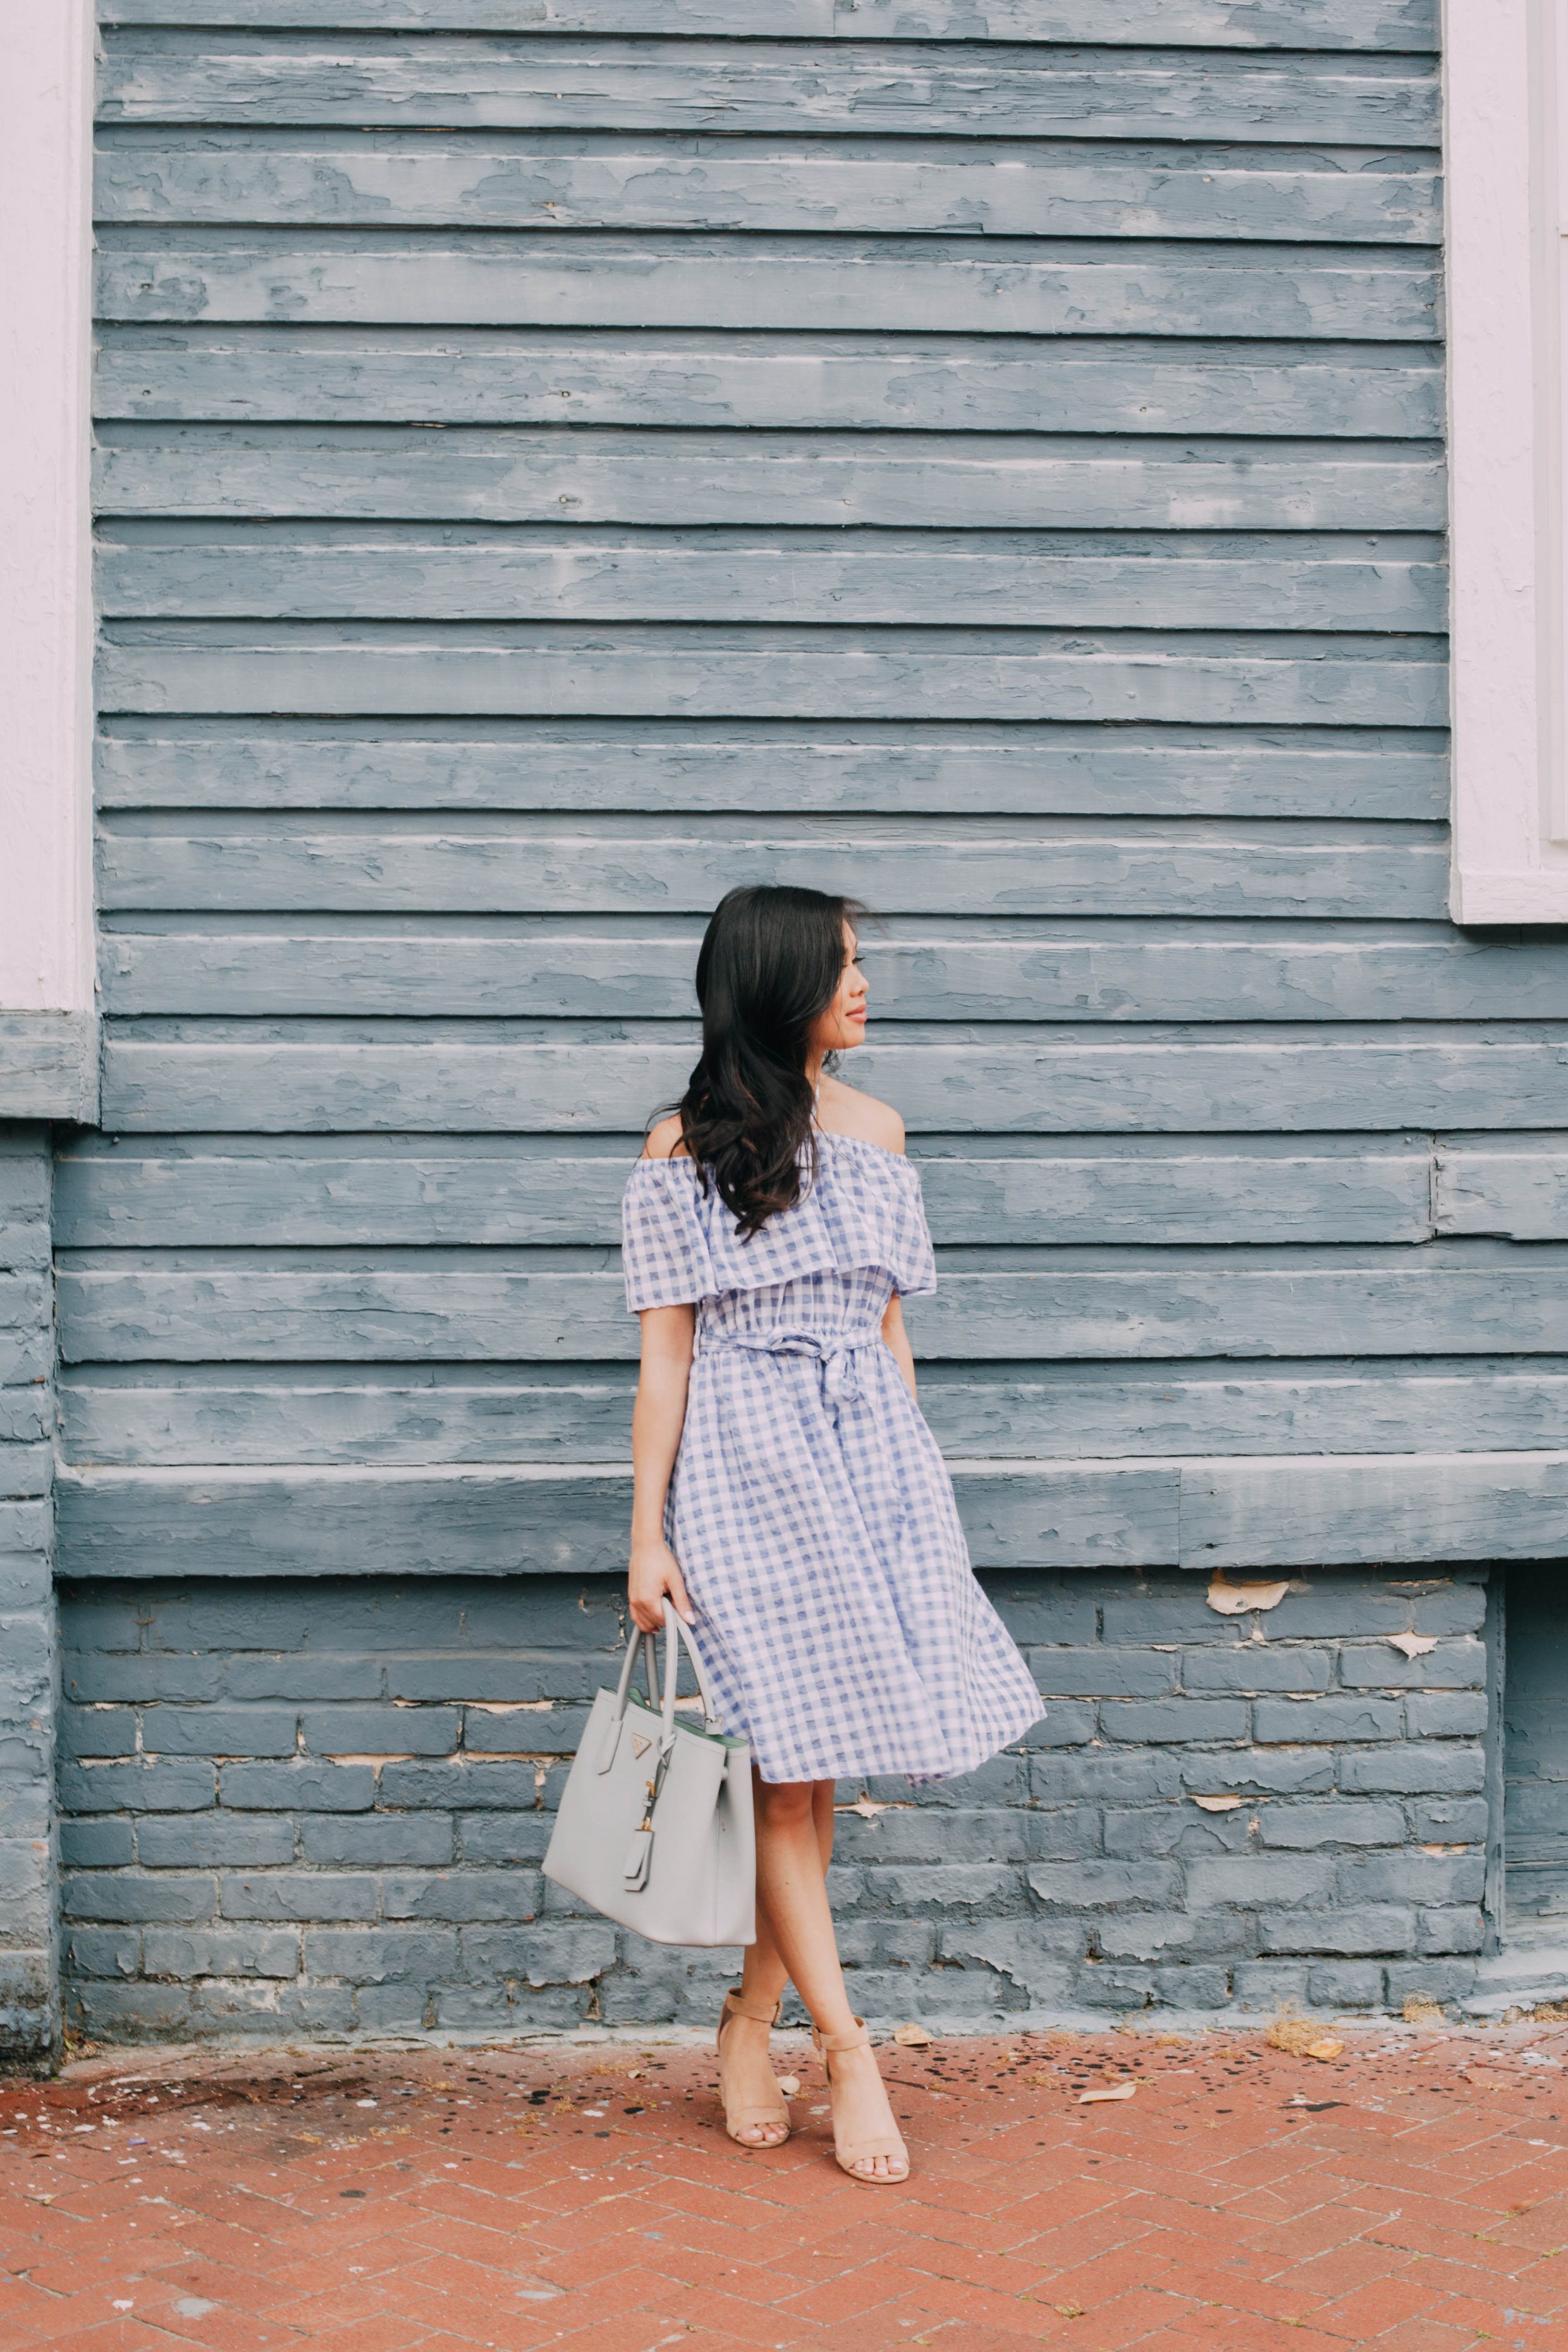 Color & Chic Gingham Halter Dress with Suede Block Heels